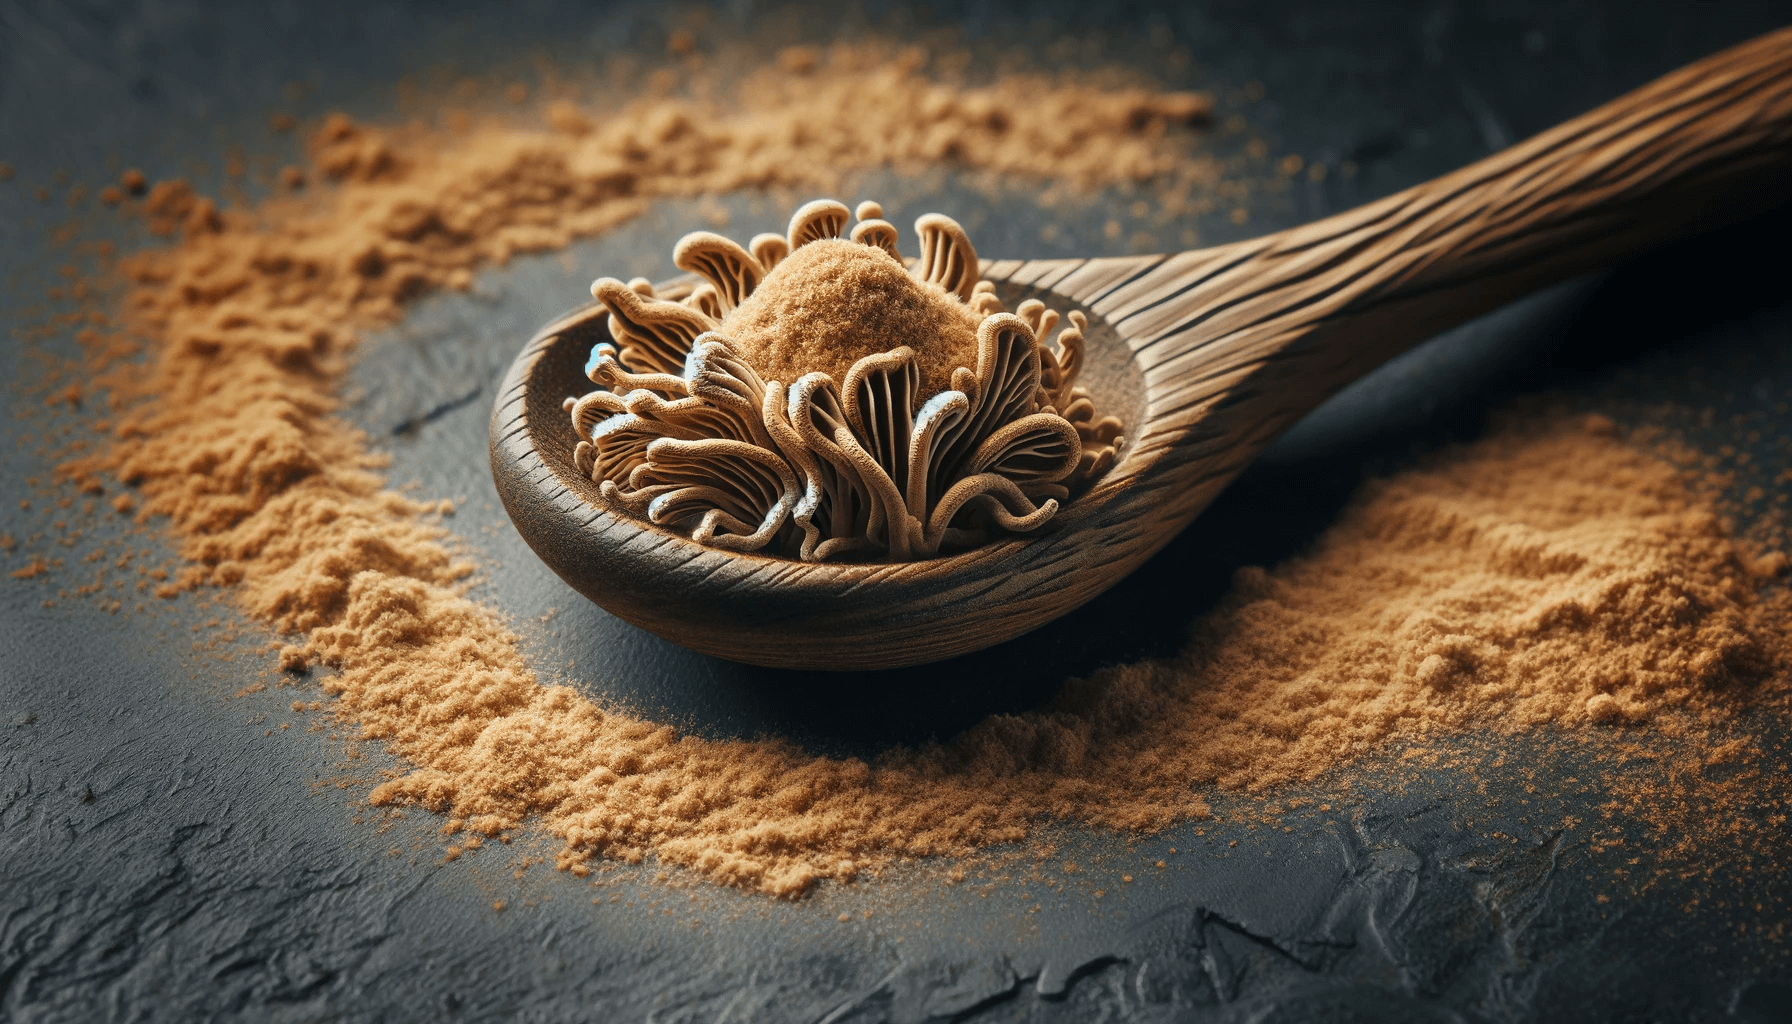 A small rustic wooden spoon filled with Lion's Mane Mushroom Extract powder placed on a dark textured surface. The spoon is hand-carved, adding a natural touch.